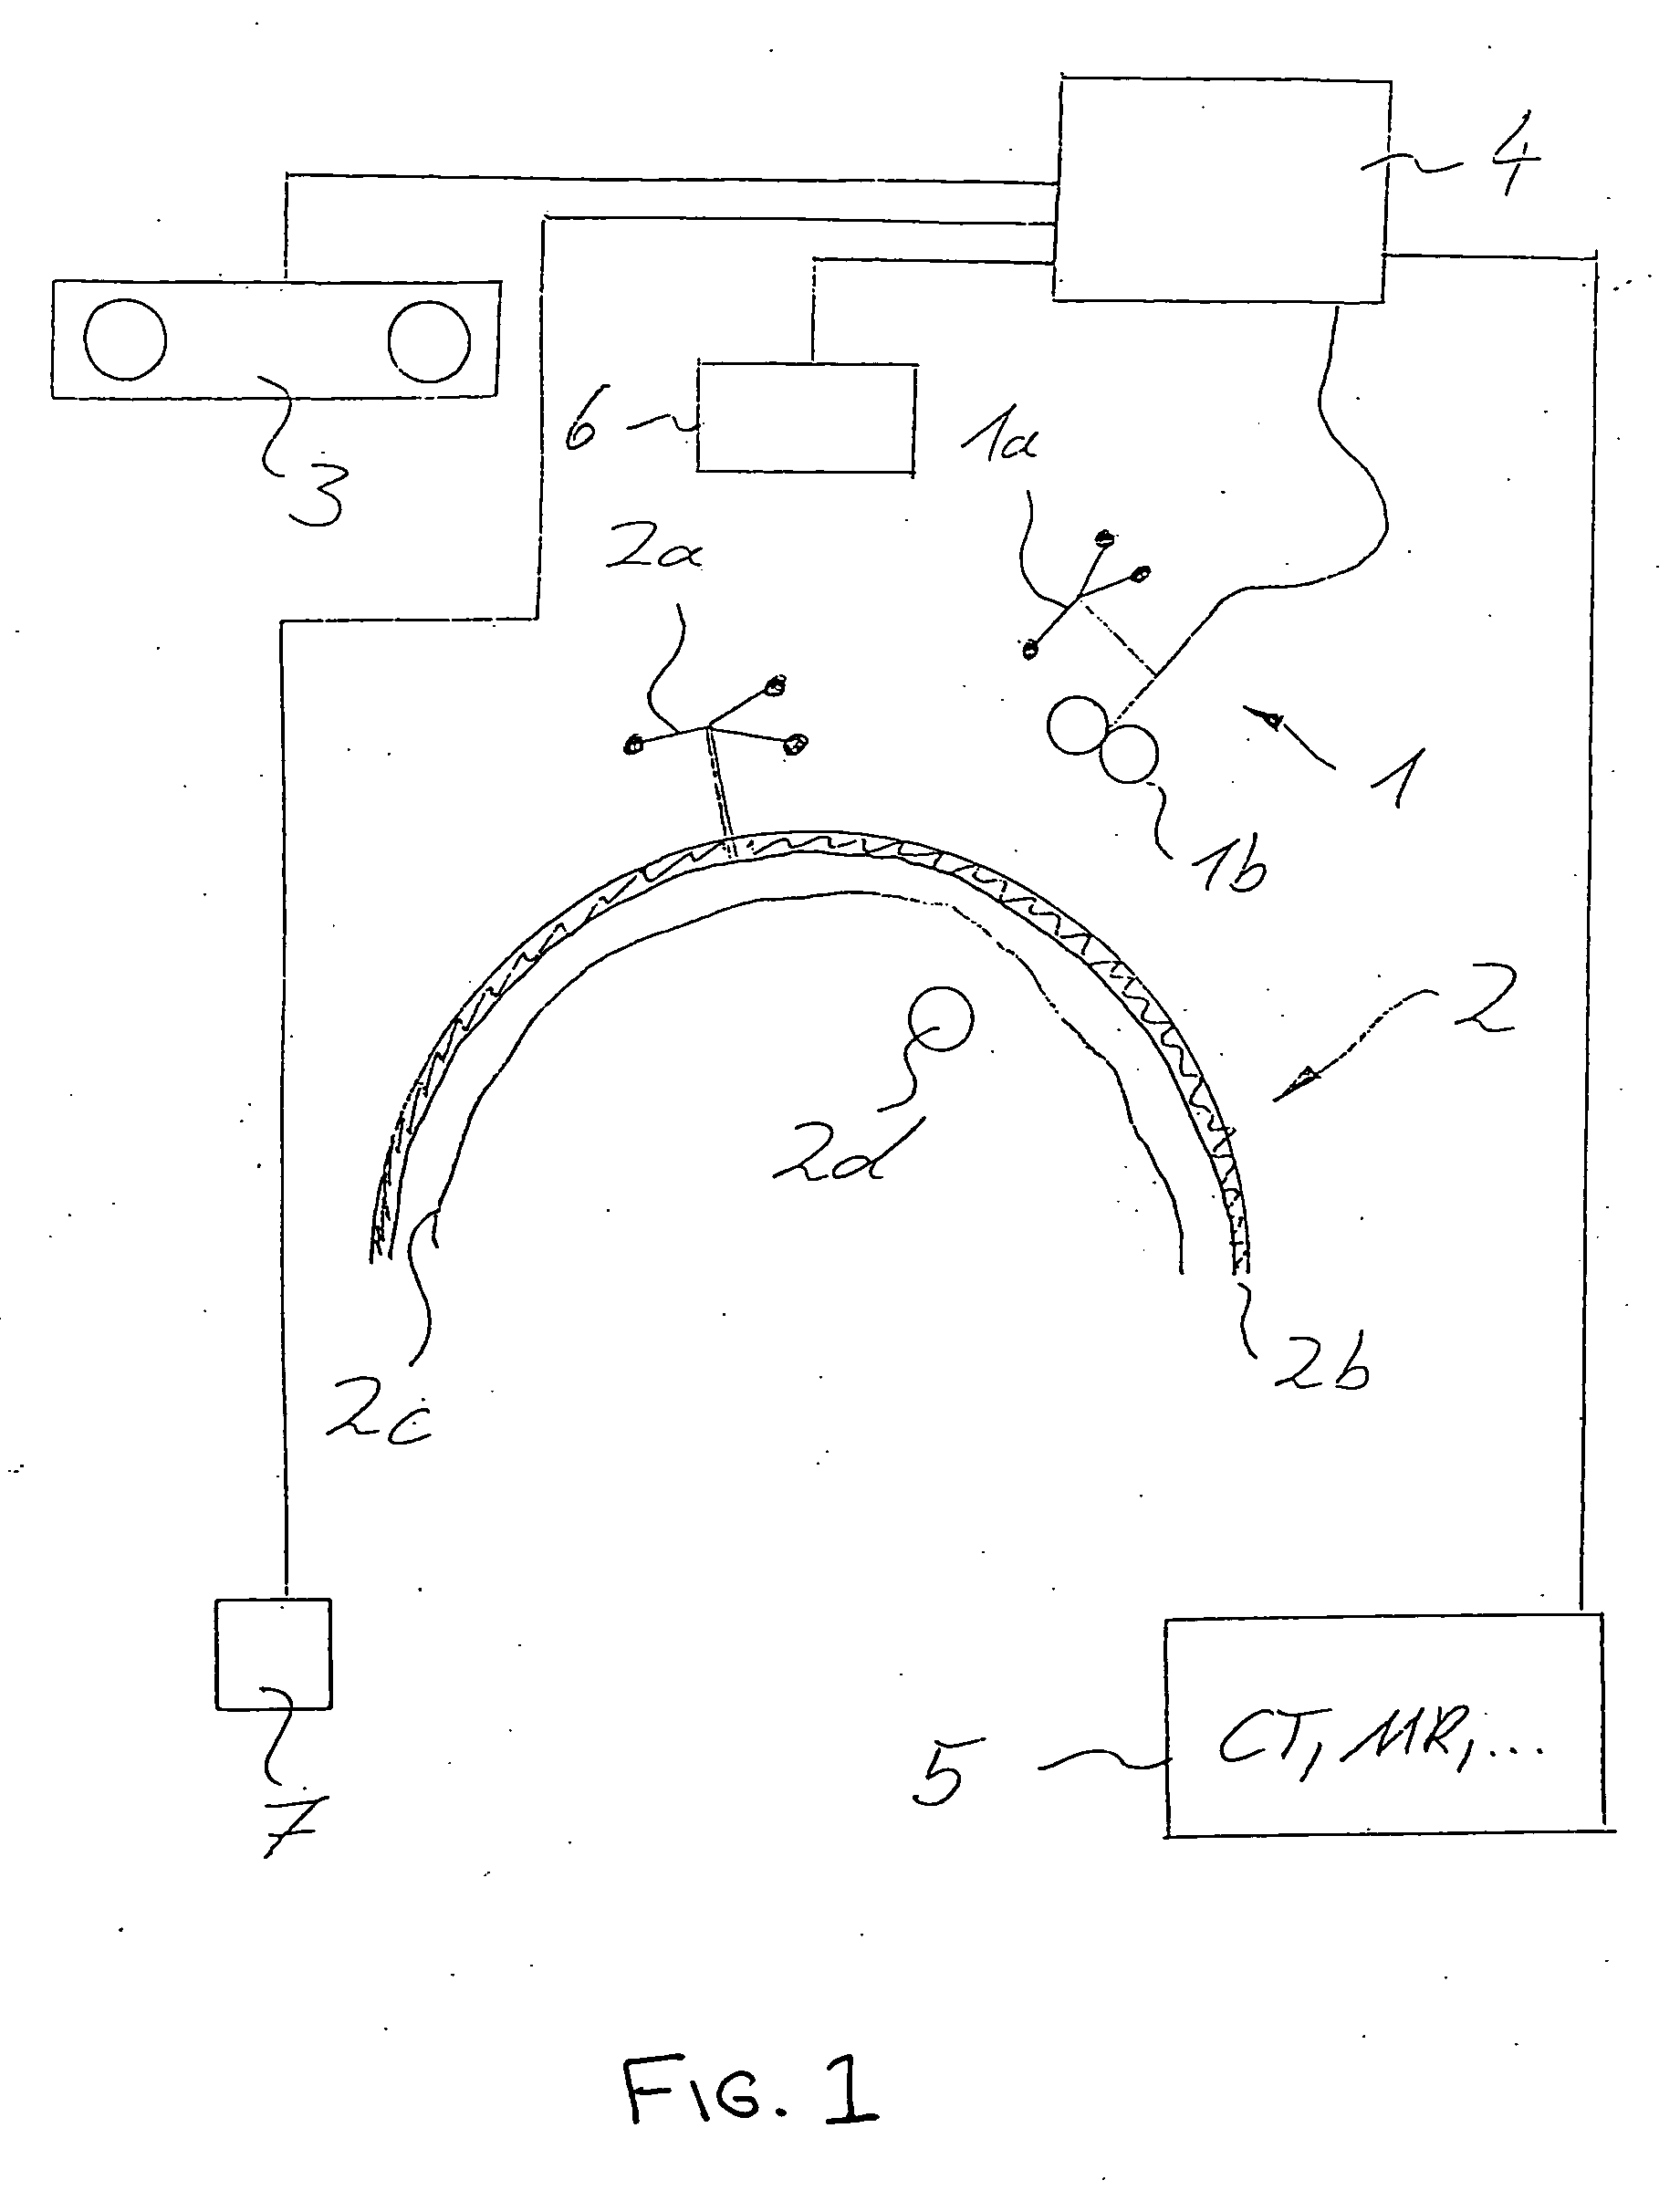 Method and device for stimulating the brain